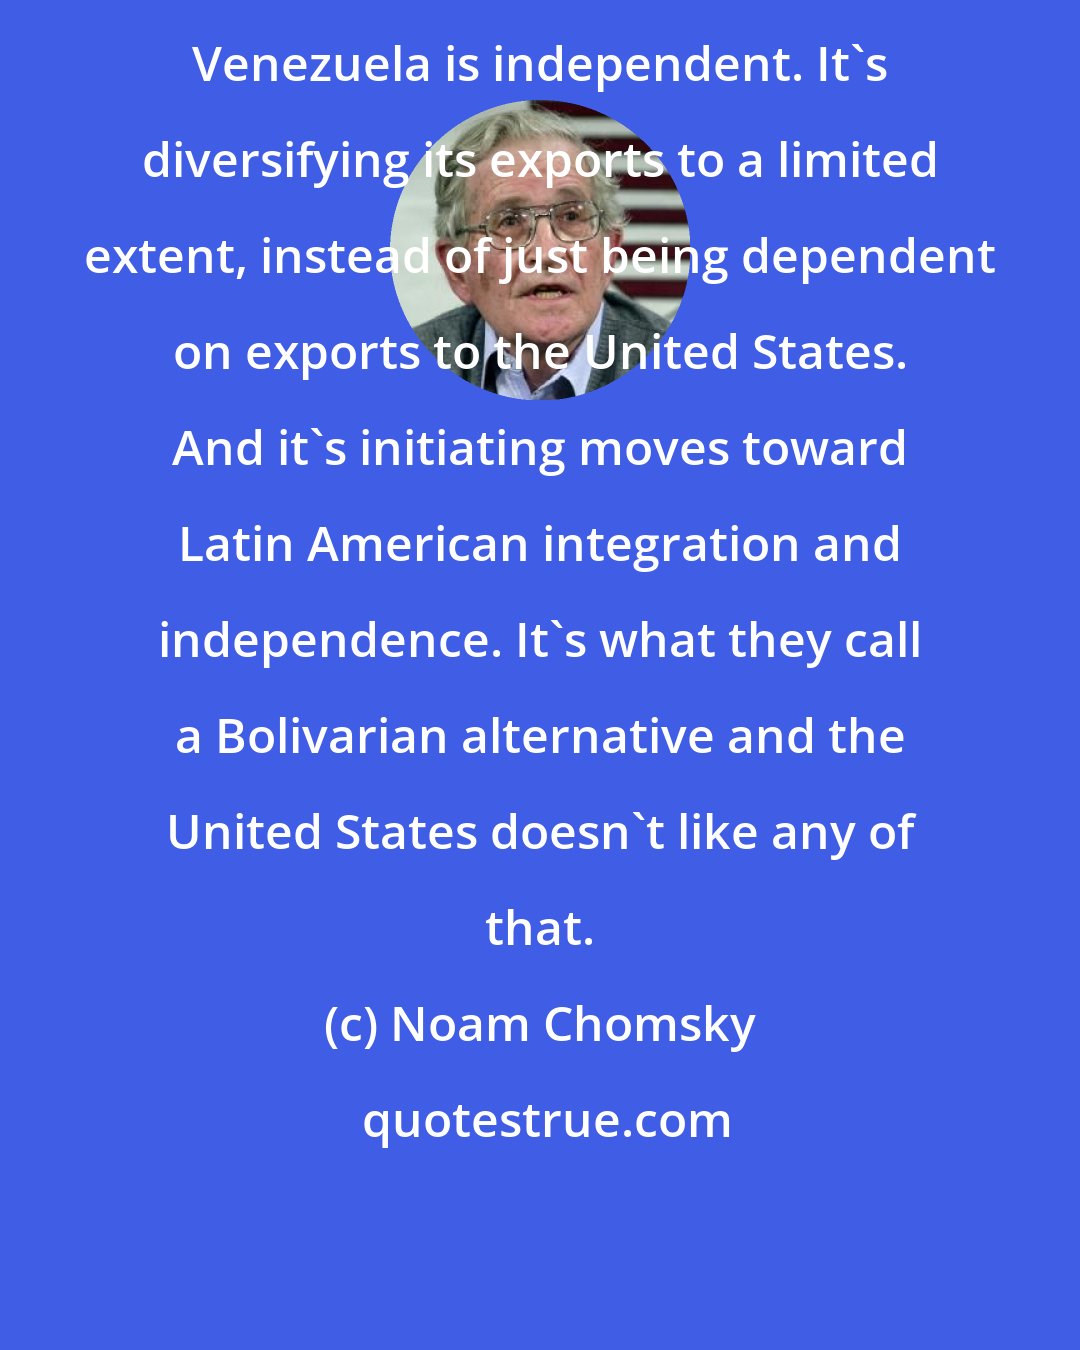 Noam Chomsky: Venezuela is independent. It's diversifying its exports to a limited extent, instead of just being dependent on exports to the United States. And it's initiating moves toward Latin American integration and independence. It's what they call a Bolivarian alternative and the United States doesn't like any of that.